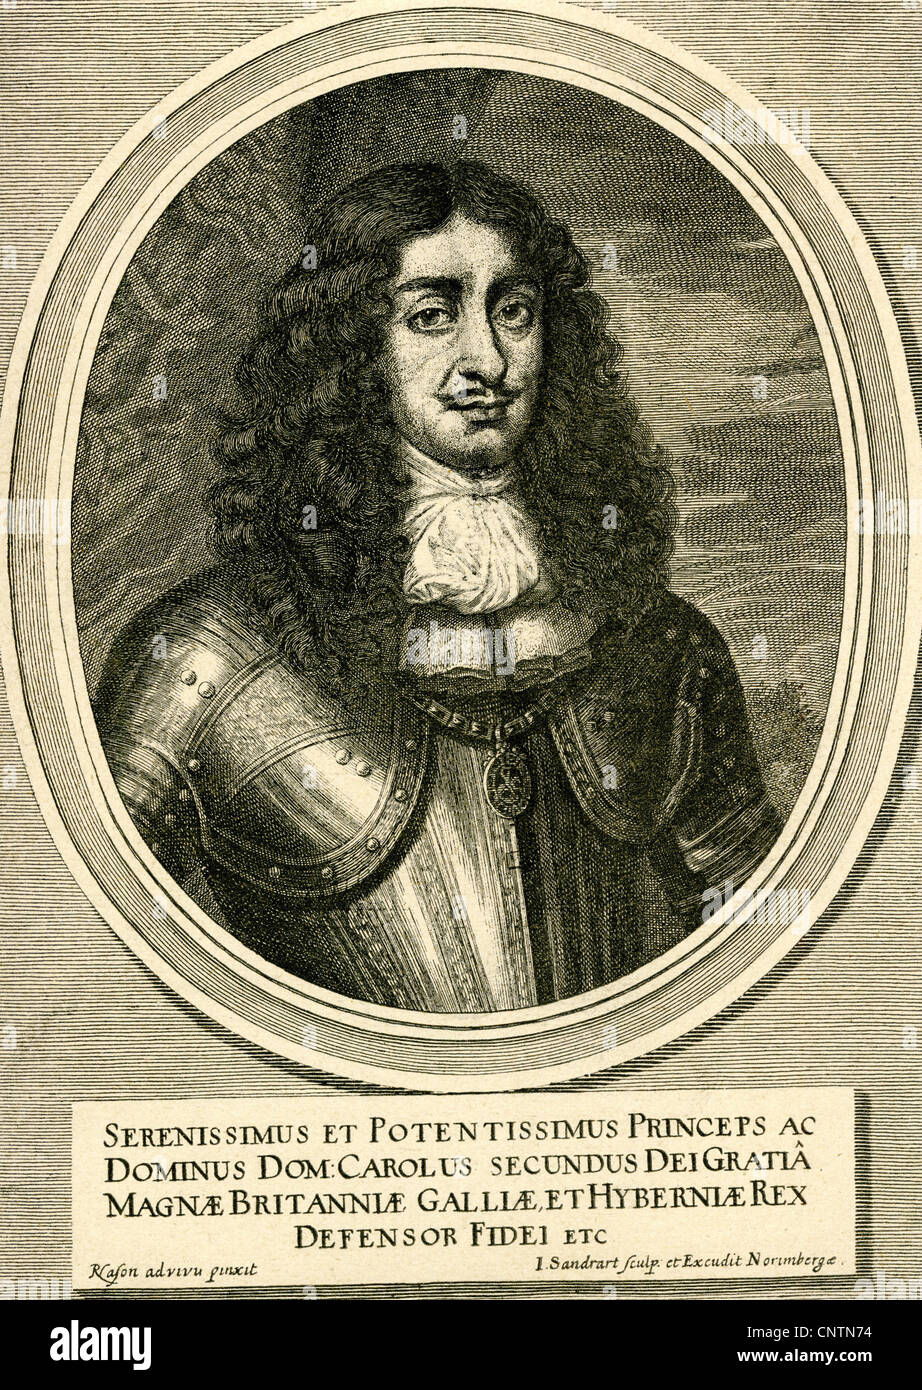 Charles II, 29.5.1630 - 6.2.1685, King of England 29.5.1660 - 29.5.1685, portrait, copper engraving by J. Sandrart, 17th century, , Artist's Copyright has not to be cleared Stock Photo